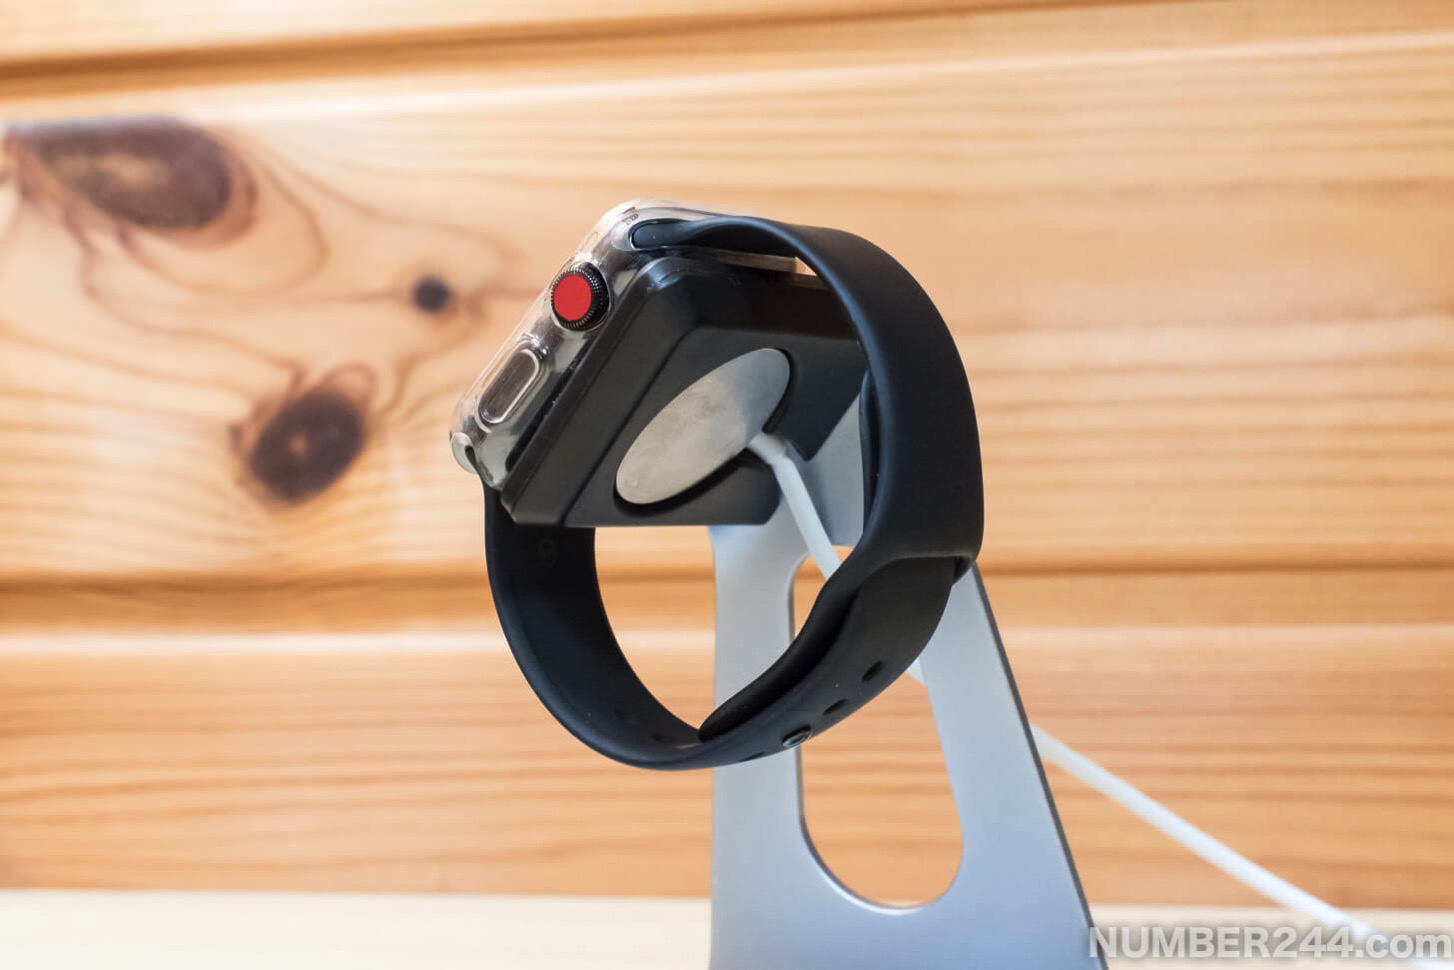 Moobom Apple Watch stand8